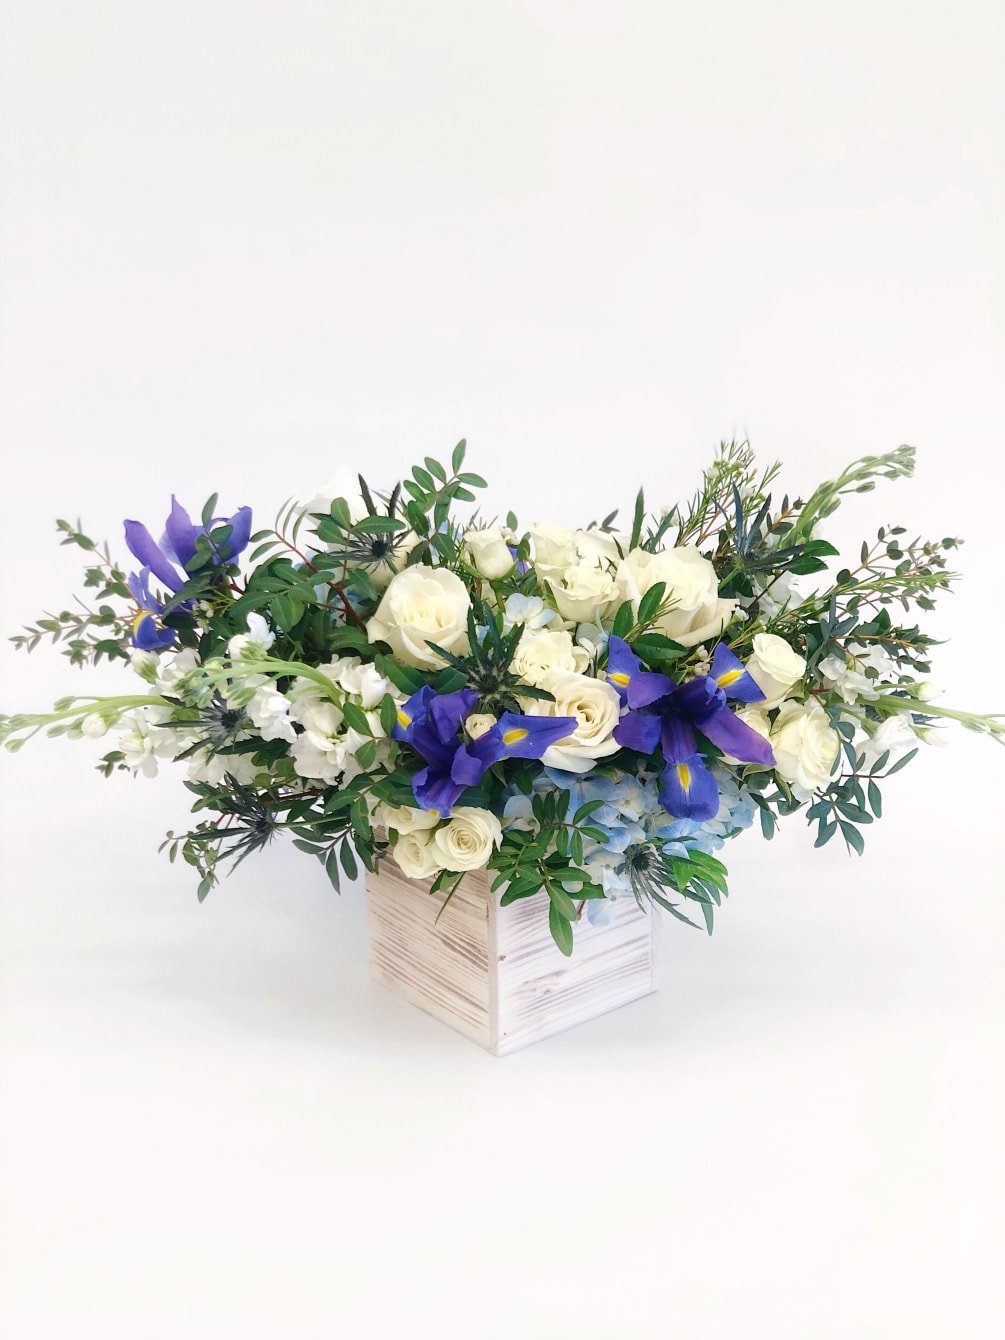 If You want bouquet with a twist, choose our flower boxes. We